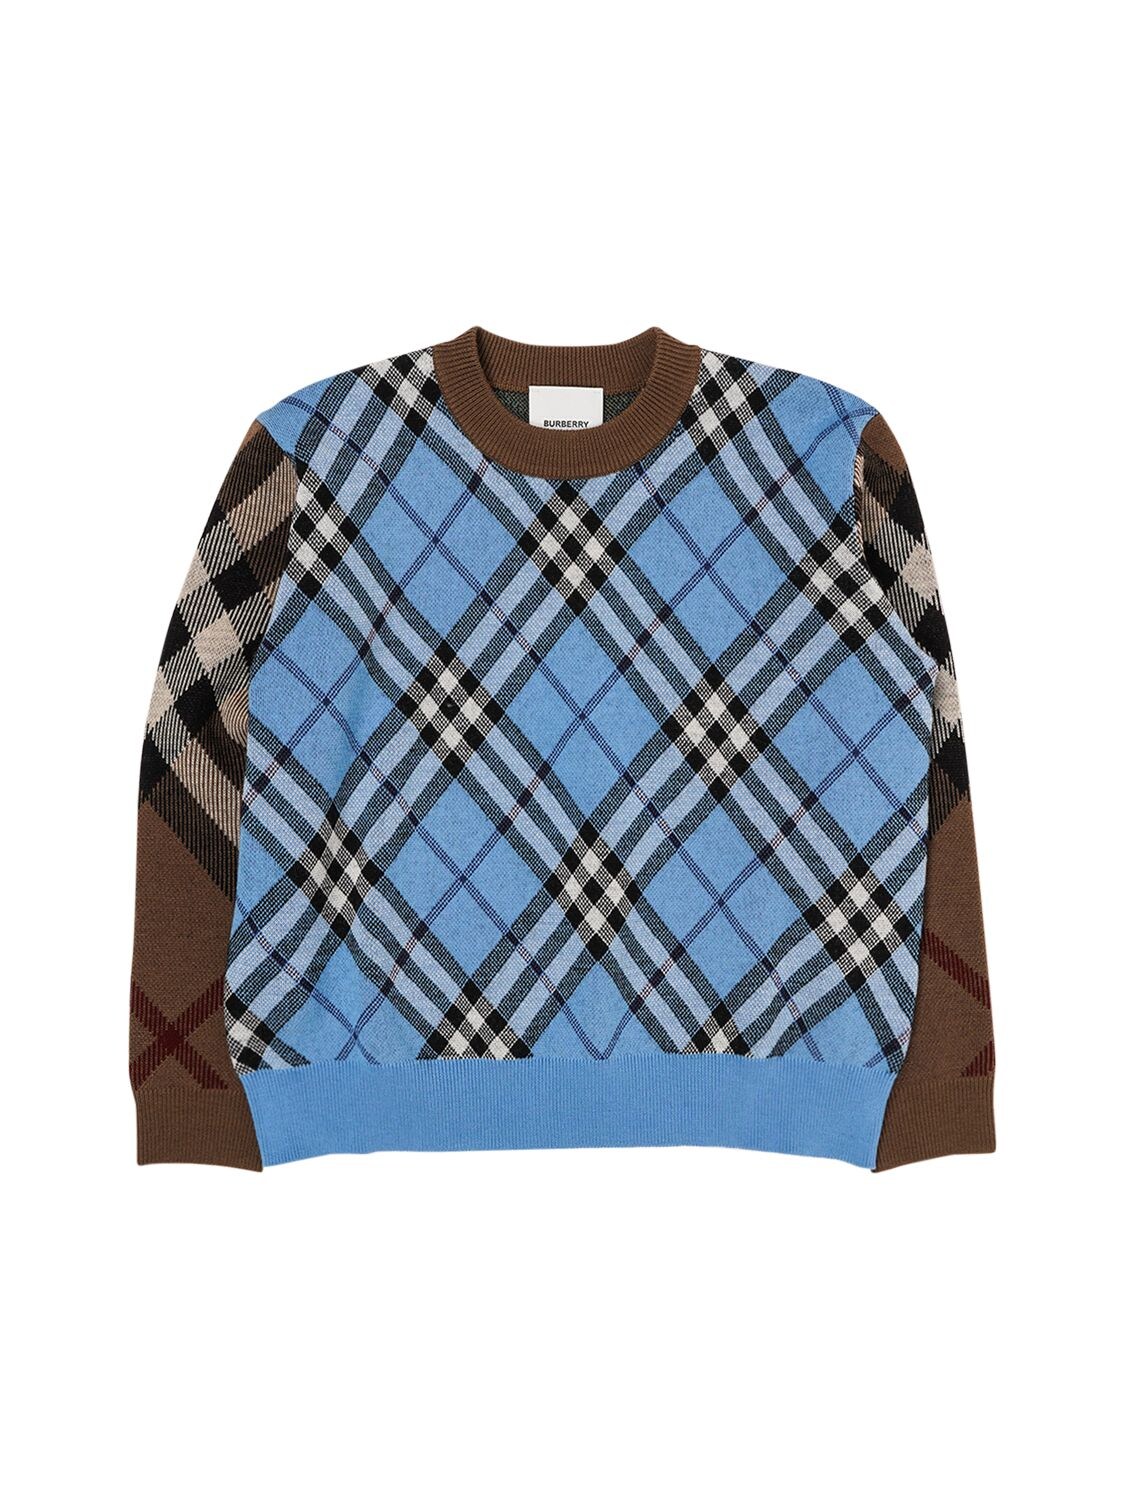 BURBERRY CONTRAST CHECK WOOL BLEND KNIT SWEATER